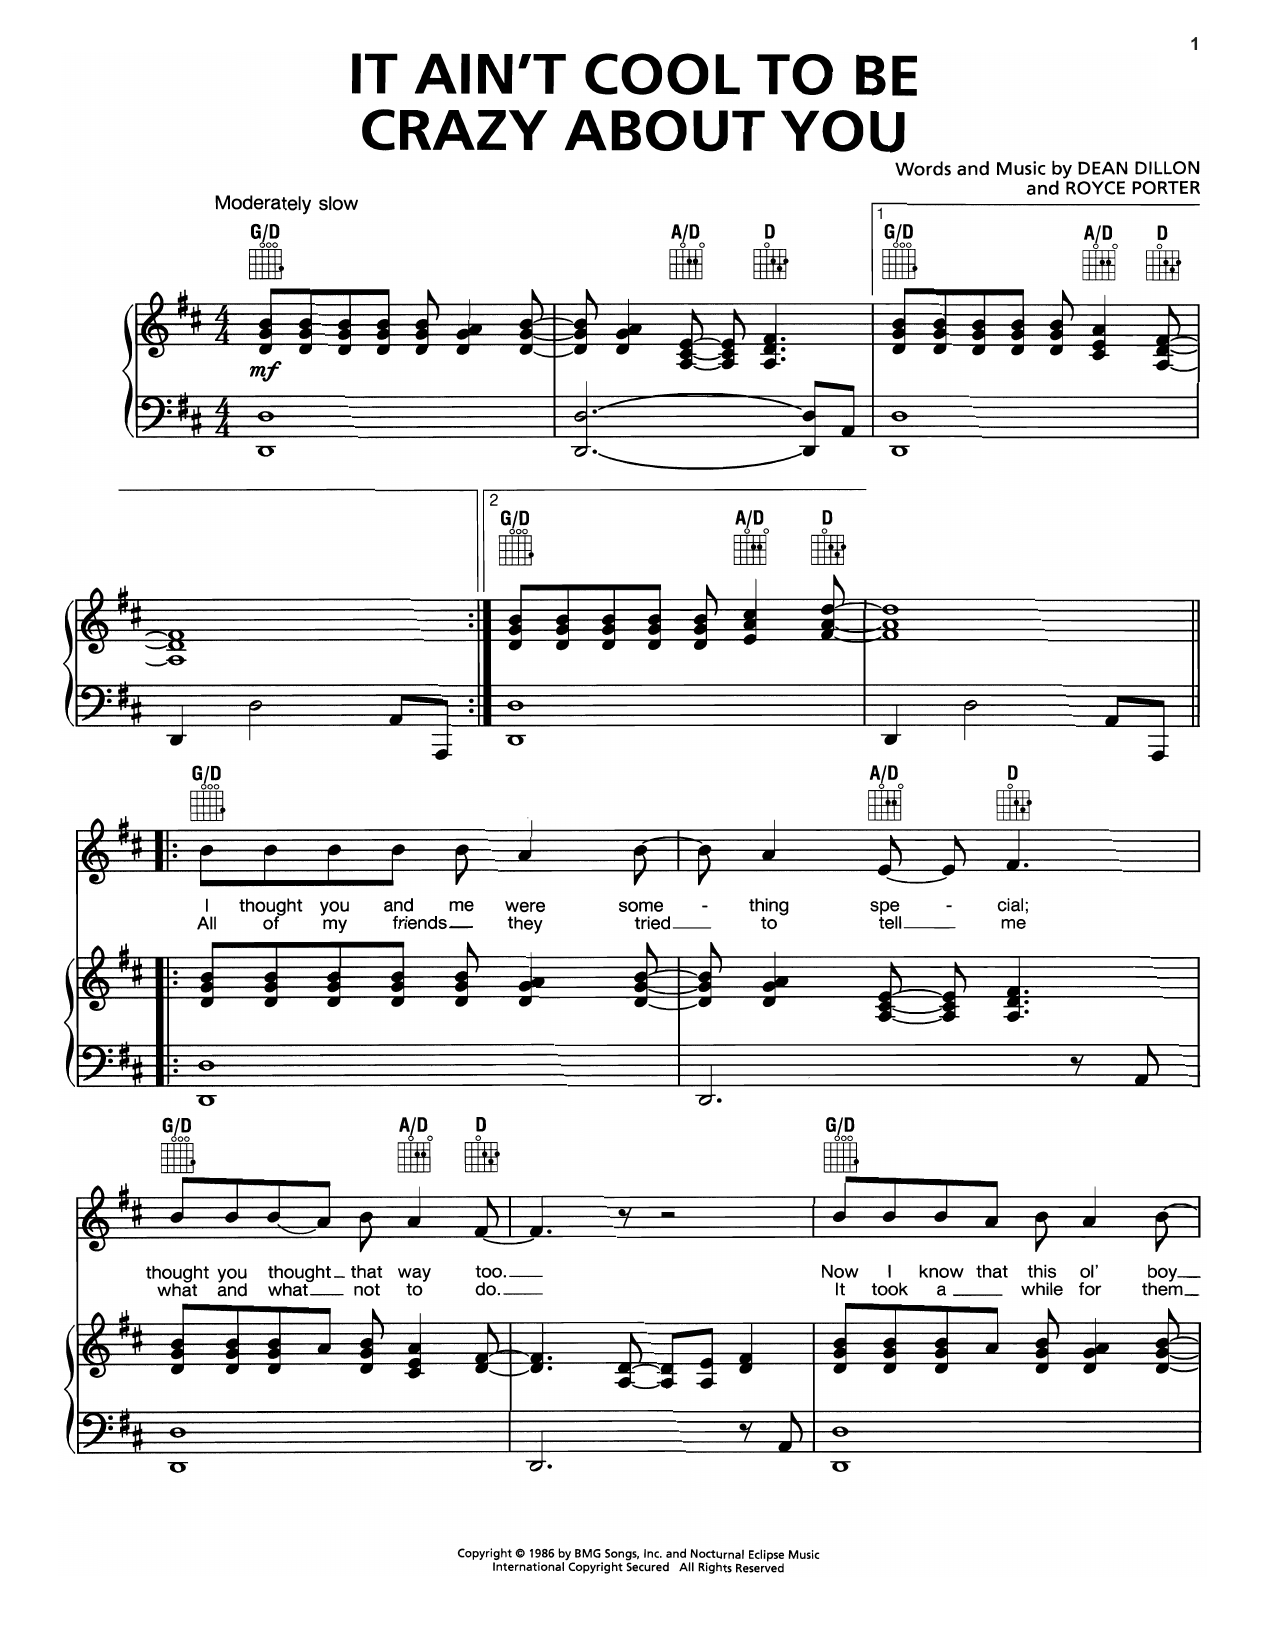 George Strait It Ain't Cool To Be Crazy About You sheet music notes and chords. Download Printable PDF.